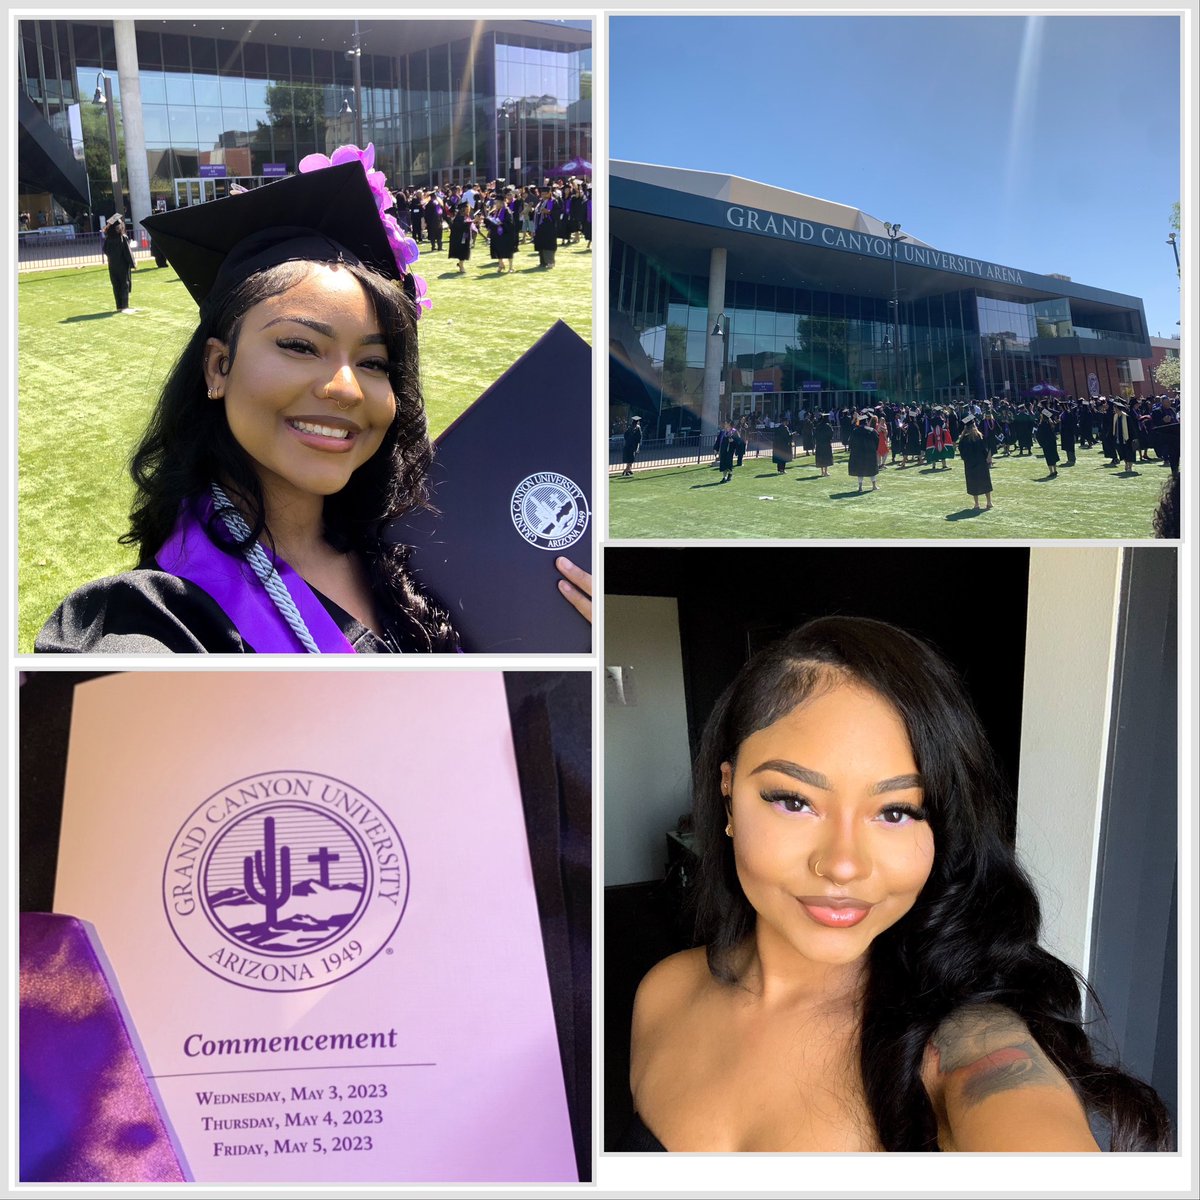 Thanking God for my journey, in the last year I secured an RN job at my dream hospital with just an Associates degree despite the odds against me. So proud to even be here an and a year later…..

Ya girl secured her BSN!!! 👩🏽‍🎓🎉🫶🏽 #RN #BSN #YouCanDoItToo